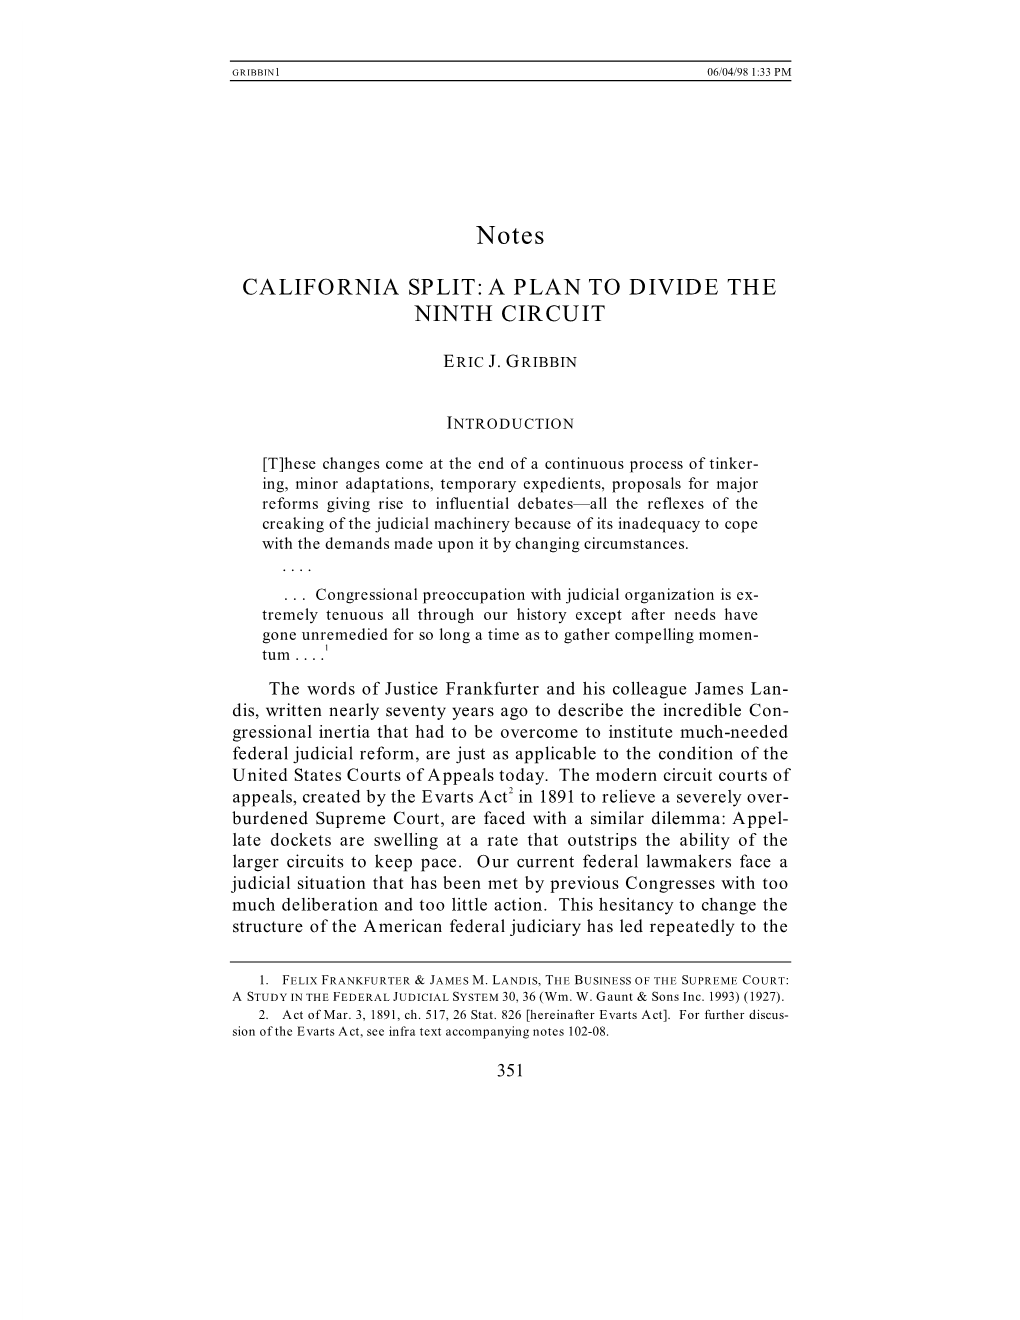 California Split: a Plan to Divide the Ninth Circuit